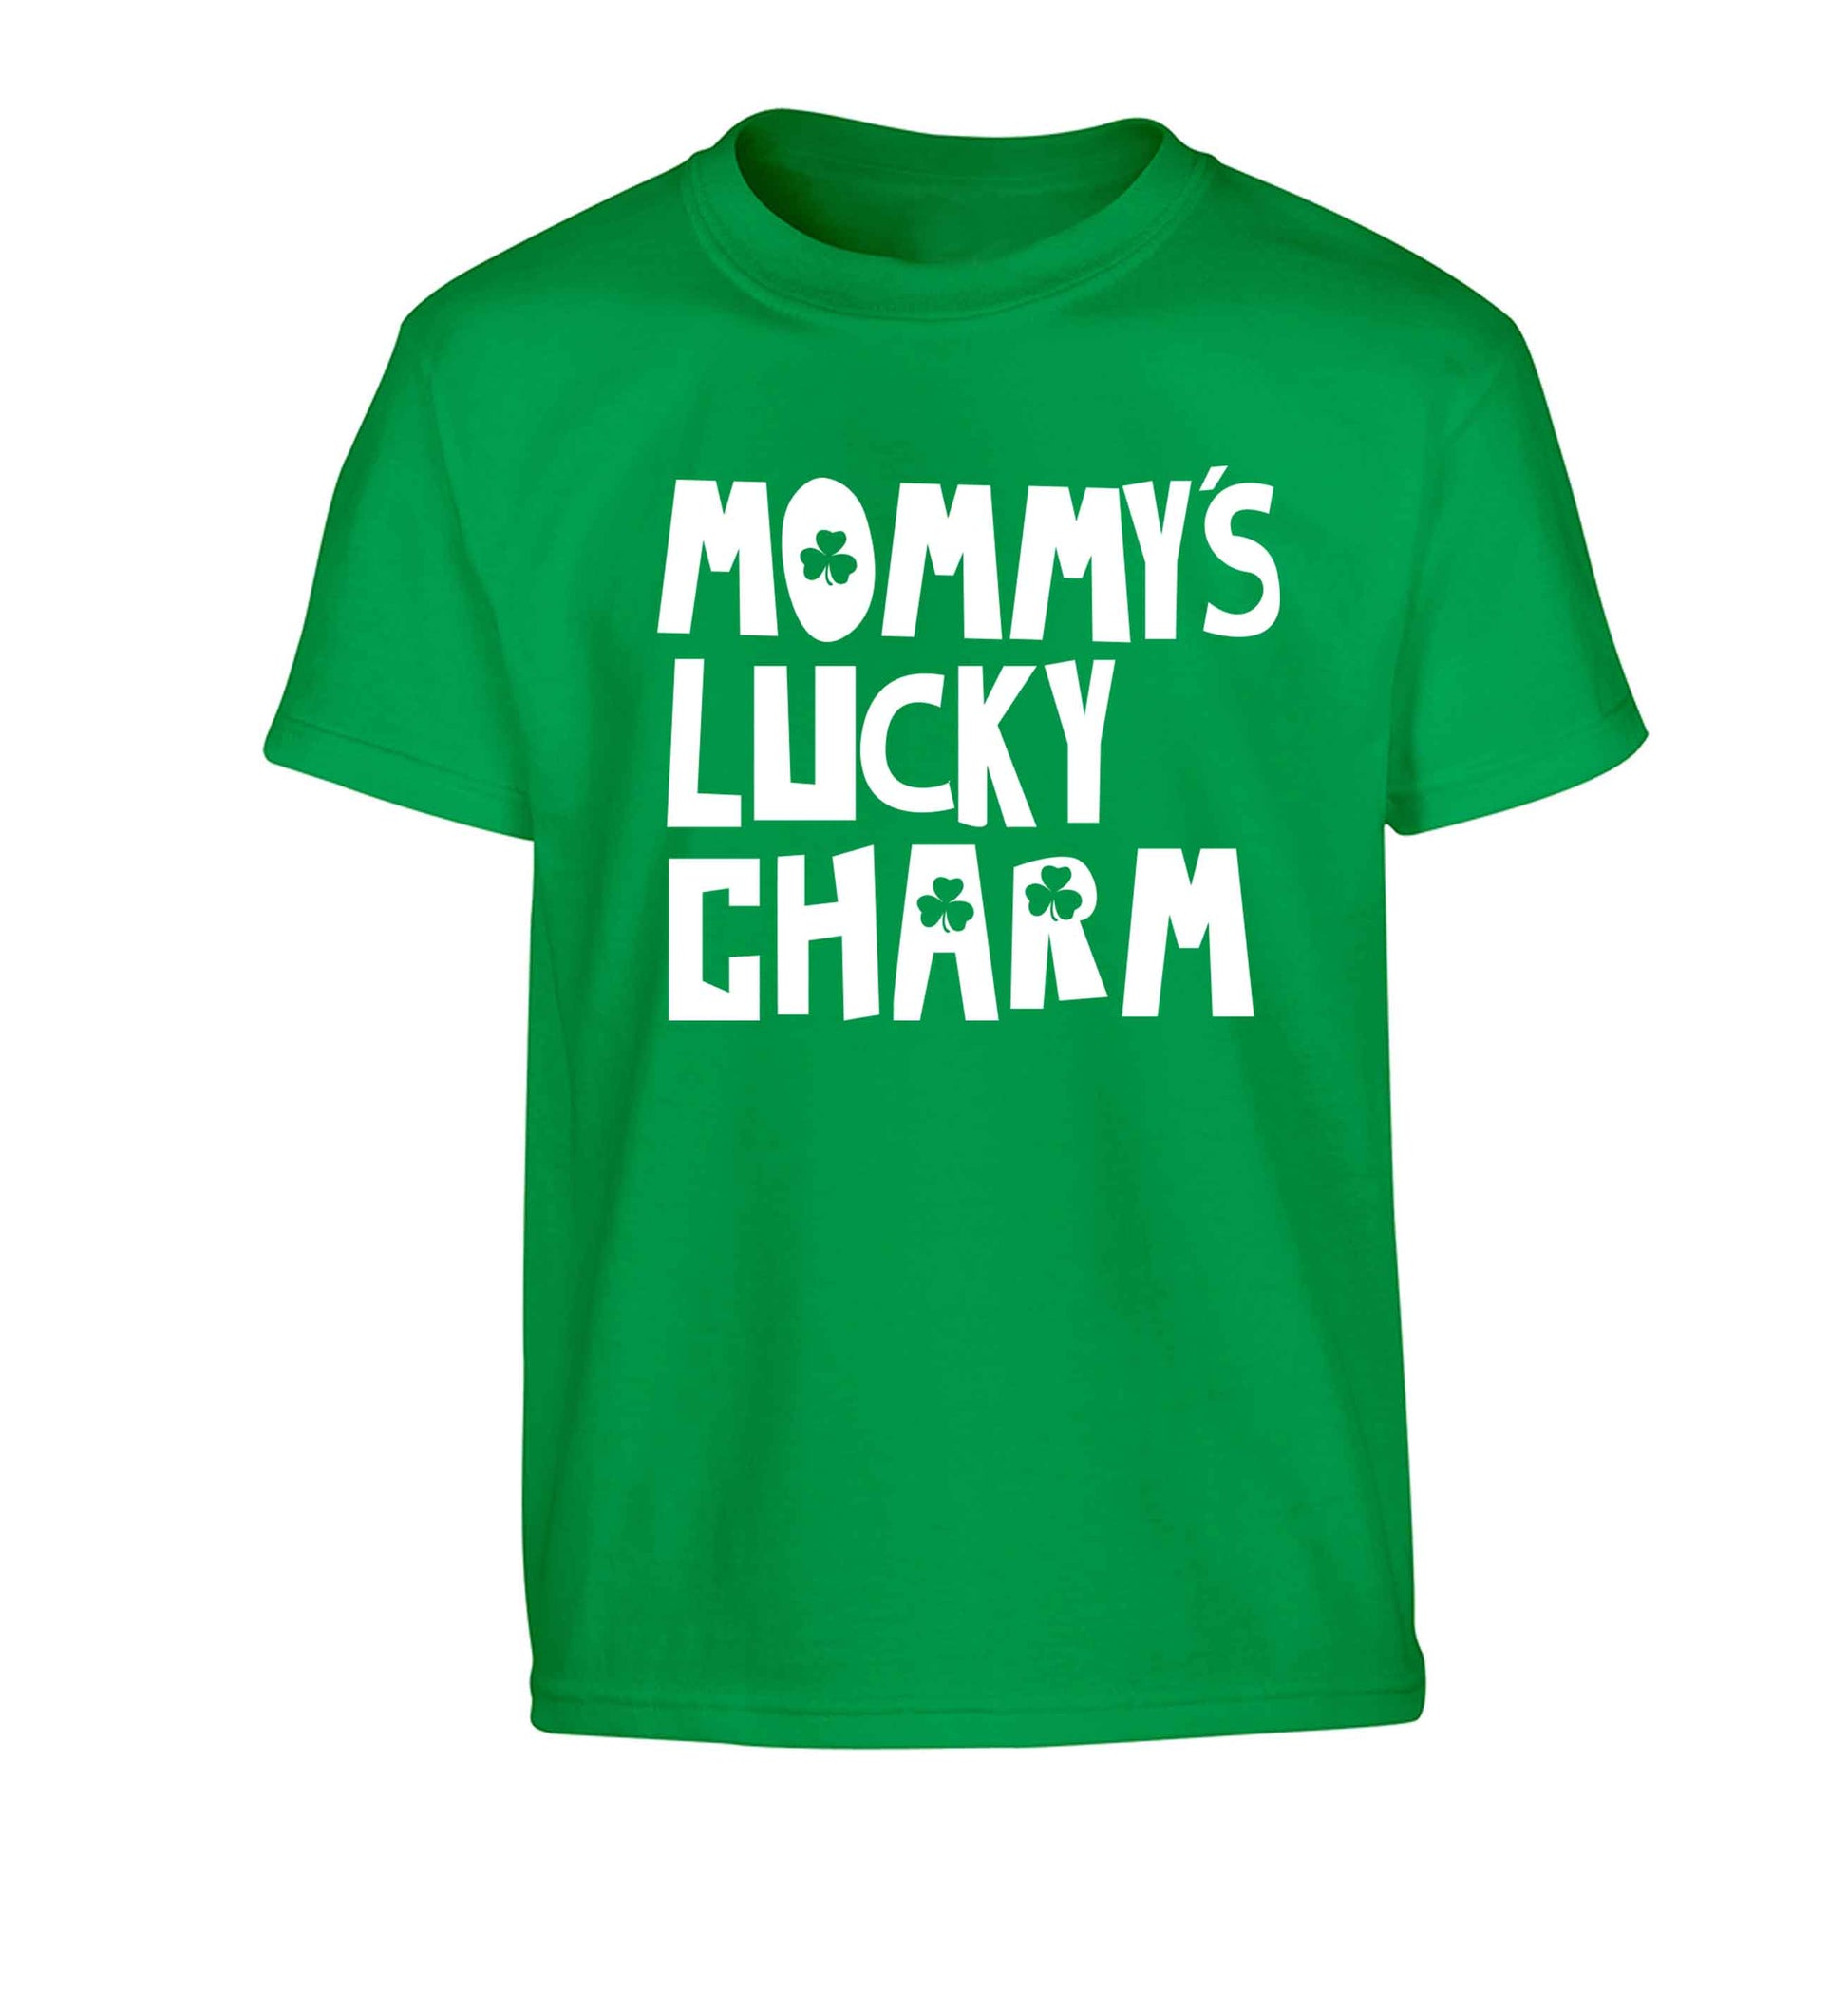 Mommy's lucky charm Children's green Tshirt 12-13 Years